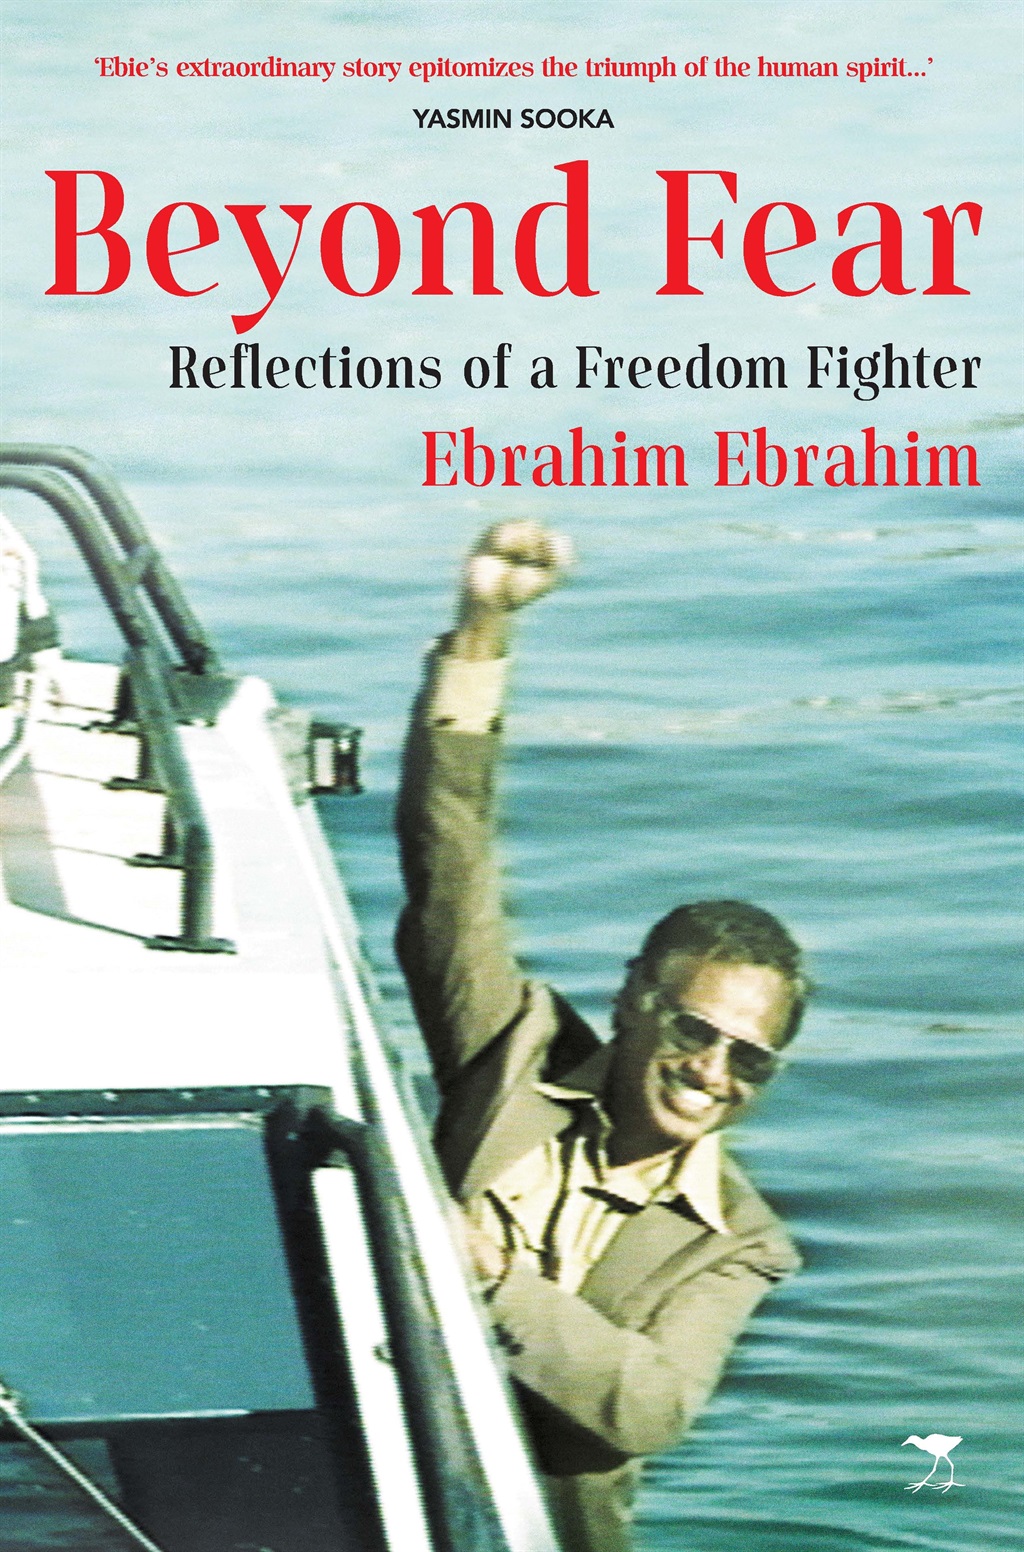 Beyond Fear: Reflections of a Freedom Fighter by Ebrahim Ebrahim. (Jacana)